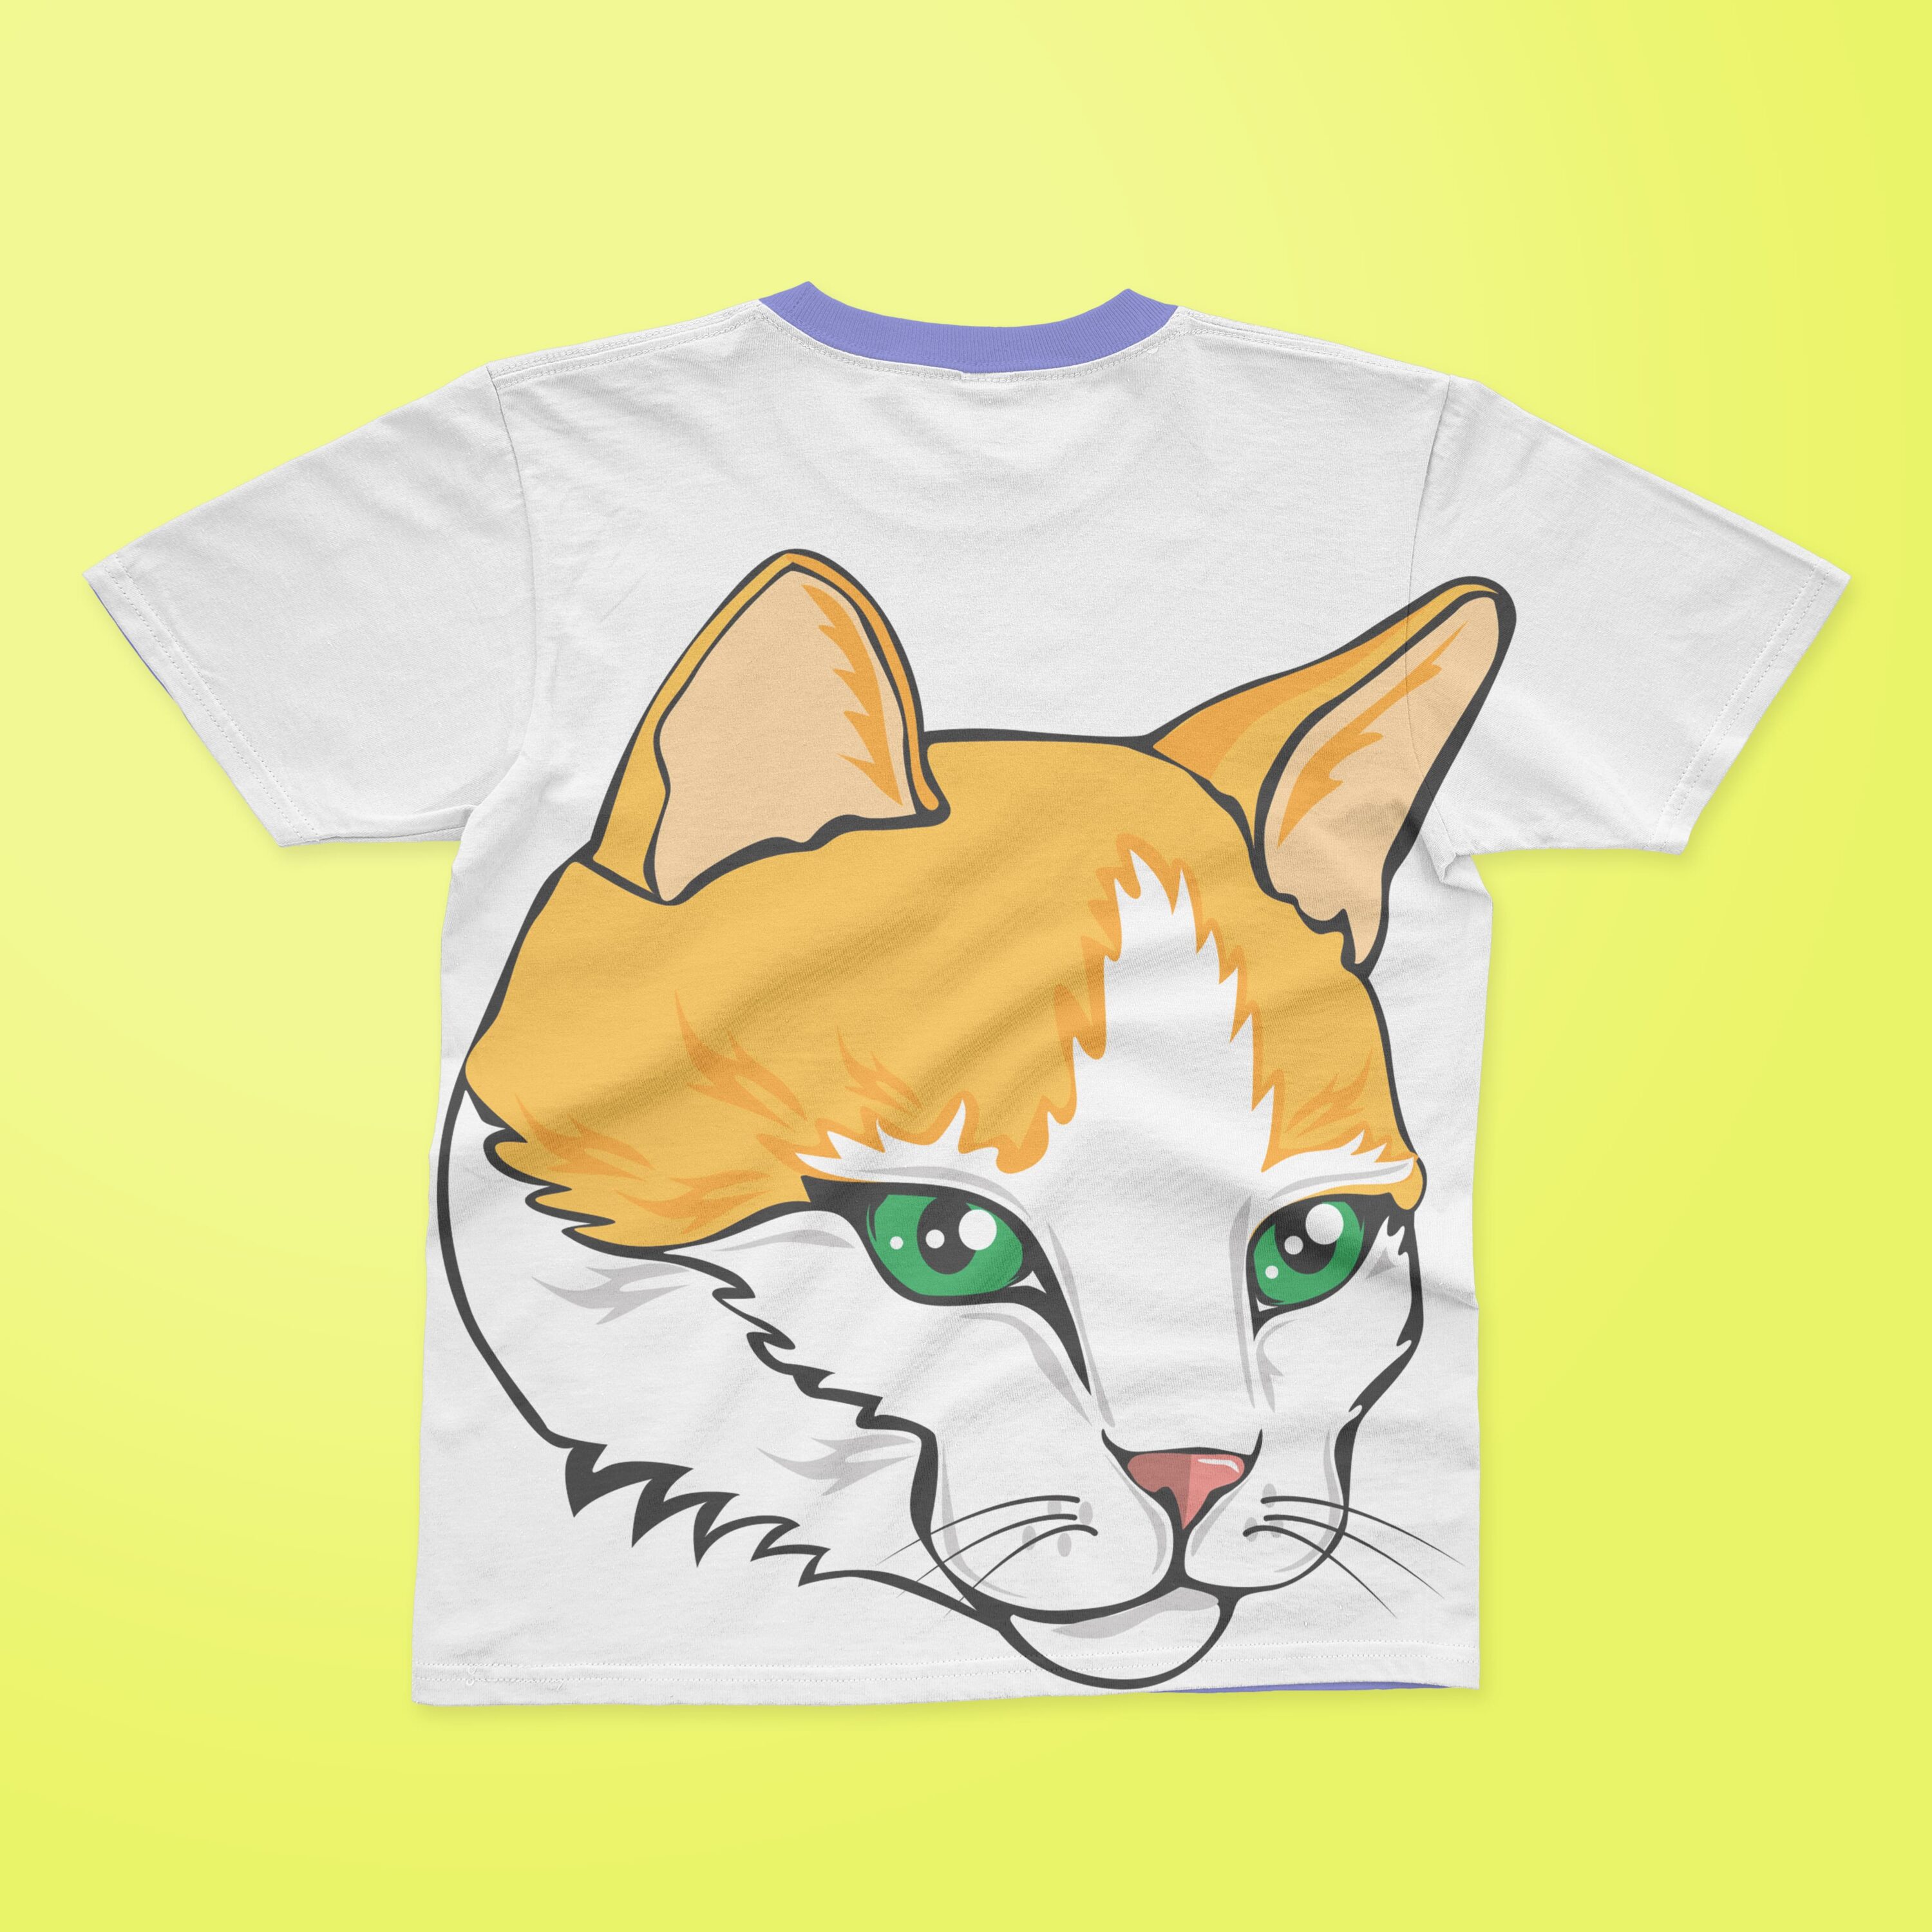 White T-shirt with a purple collar and a face of a ginger and white cat.